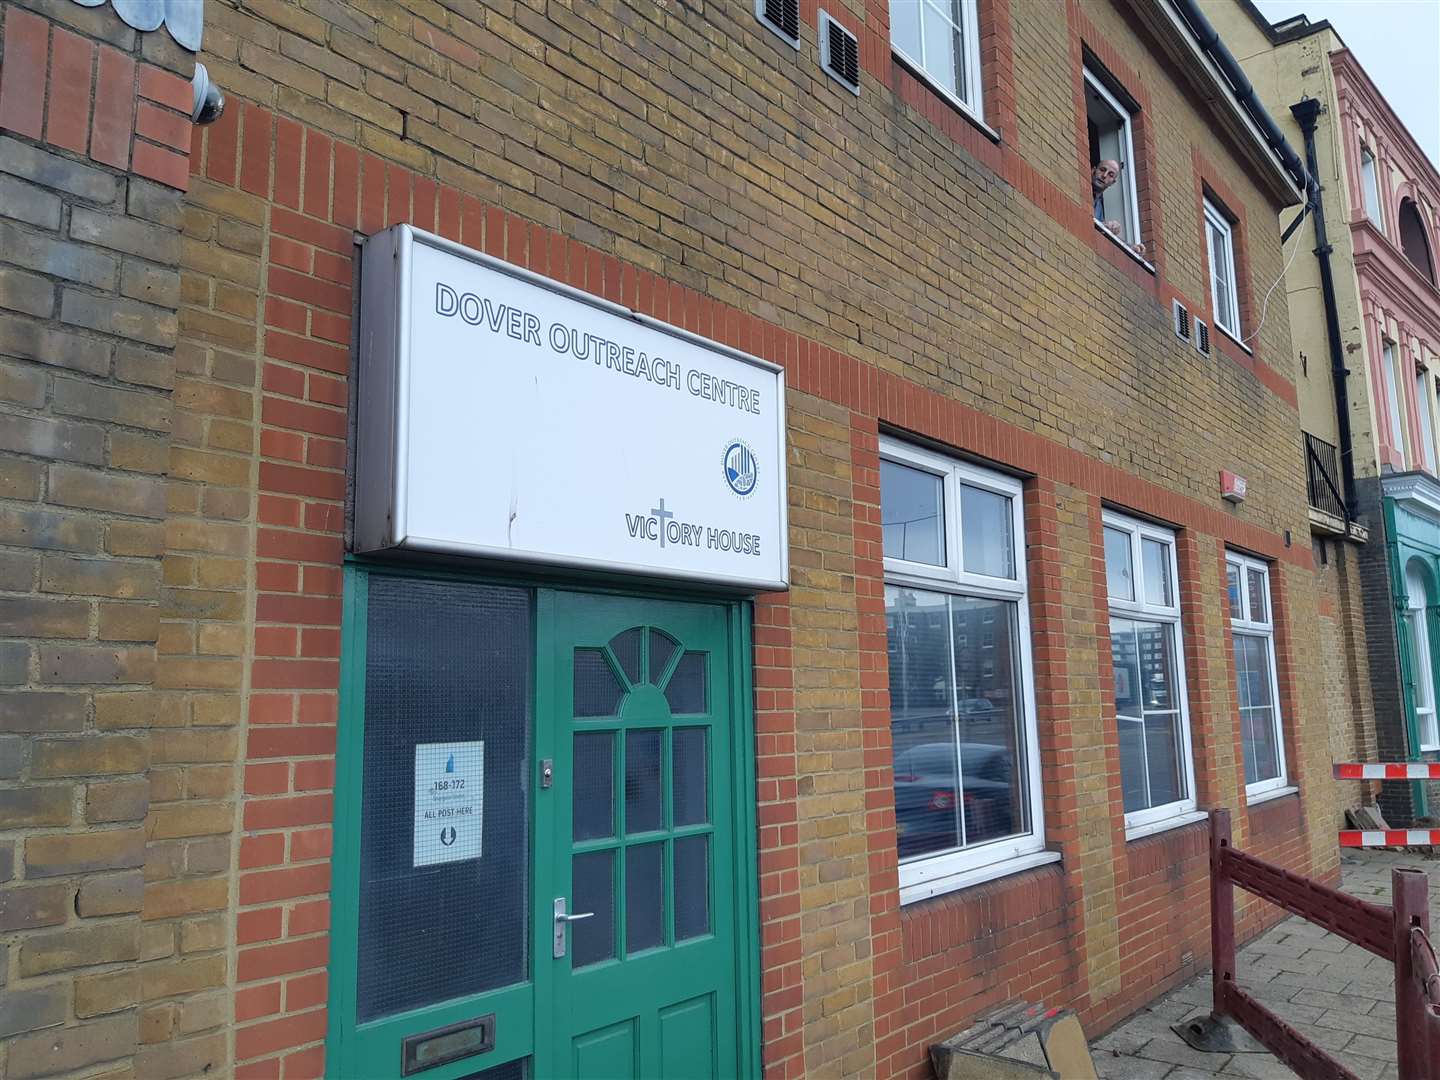 The Dover Outreach Centre in Snargate Street. Picture: Sam Lennon